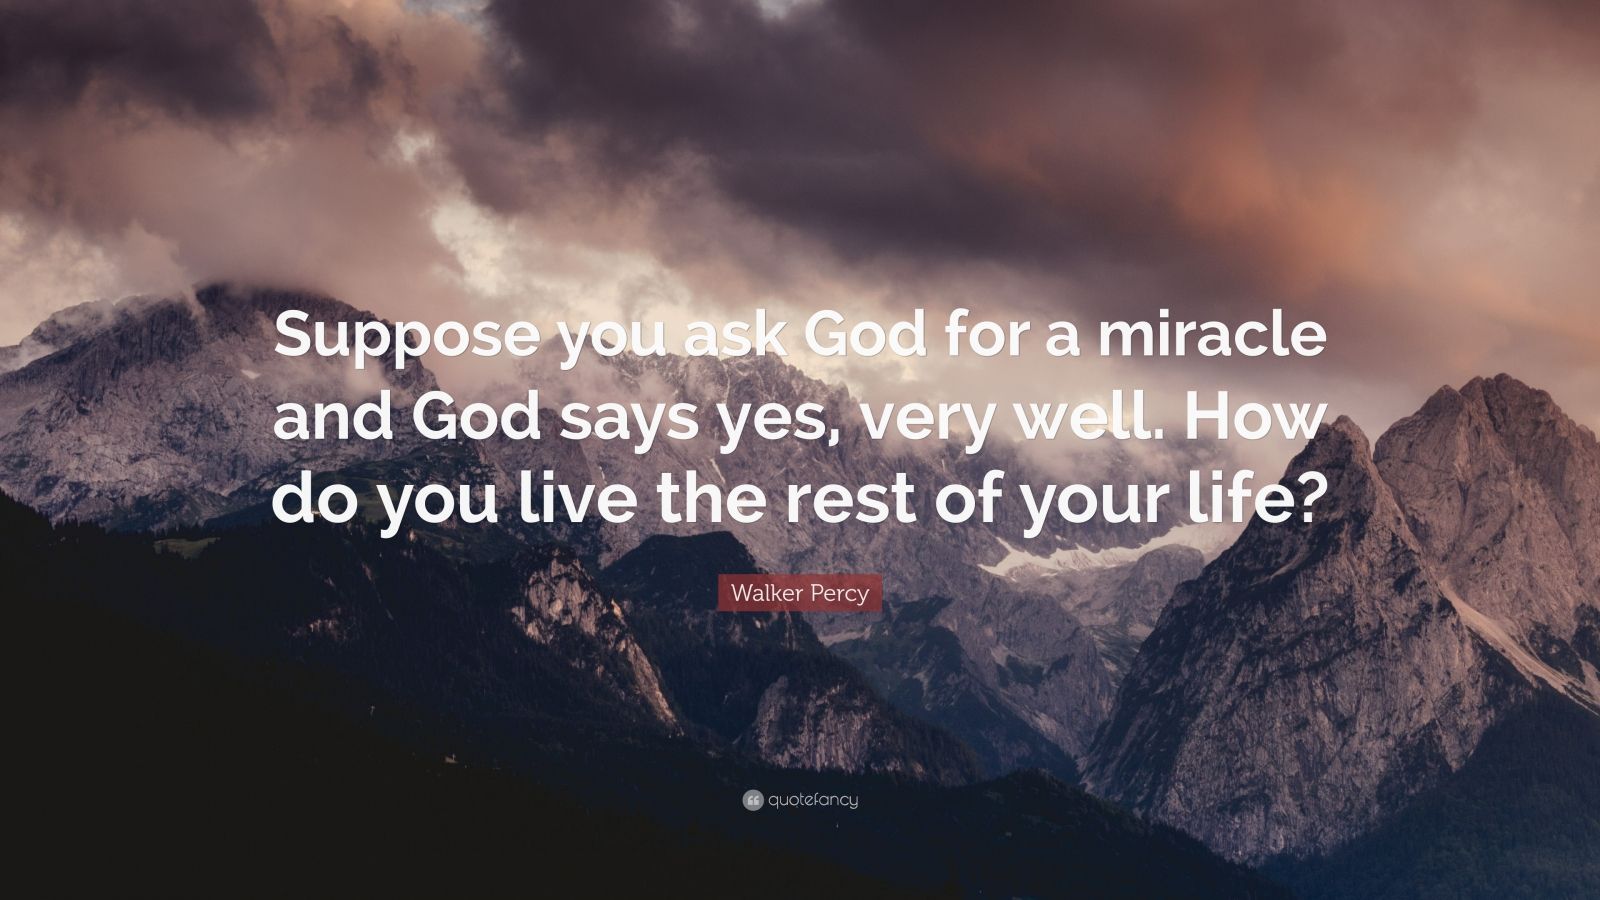 Walker Percy Quote: “Suppose you ask God for a miracle and God says yes ...